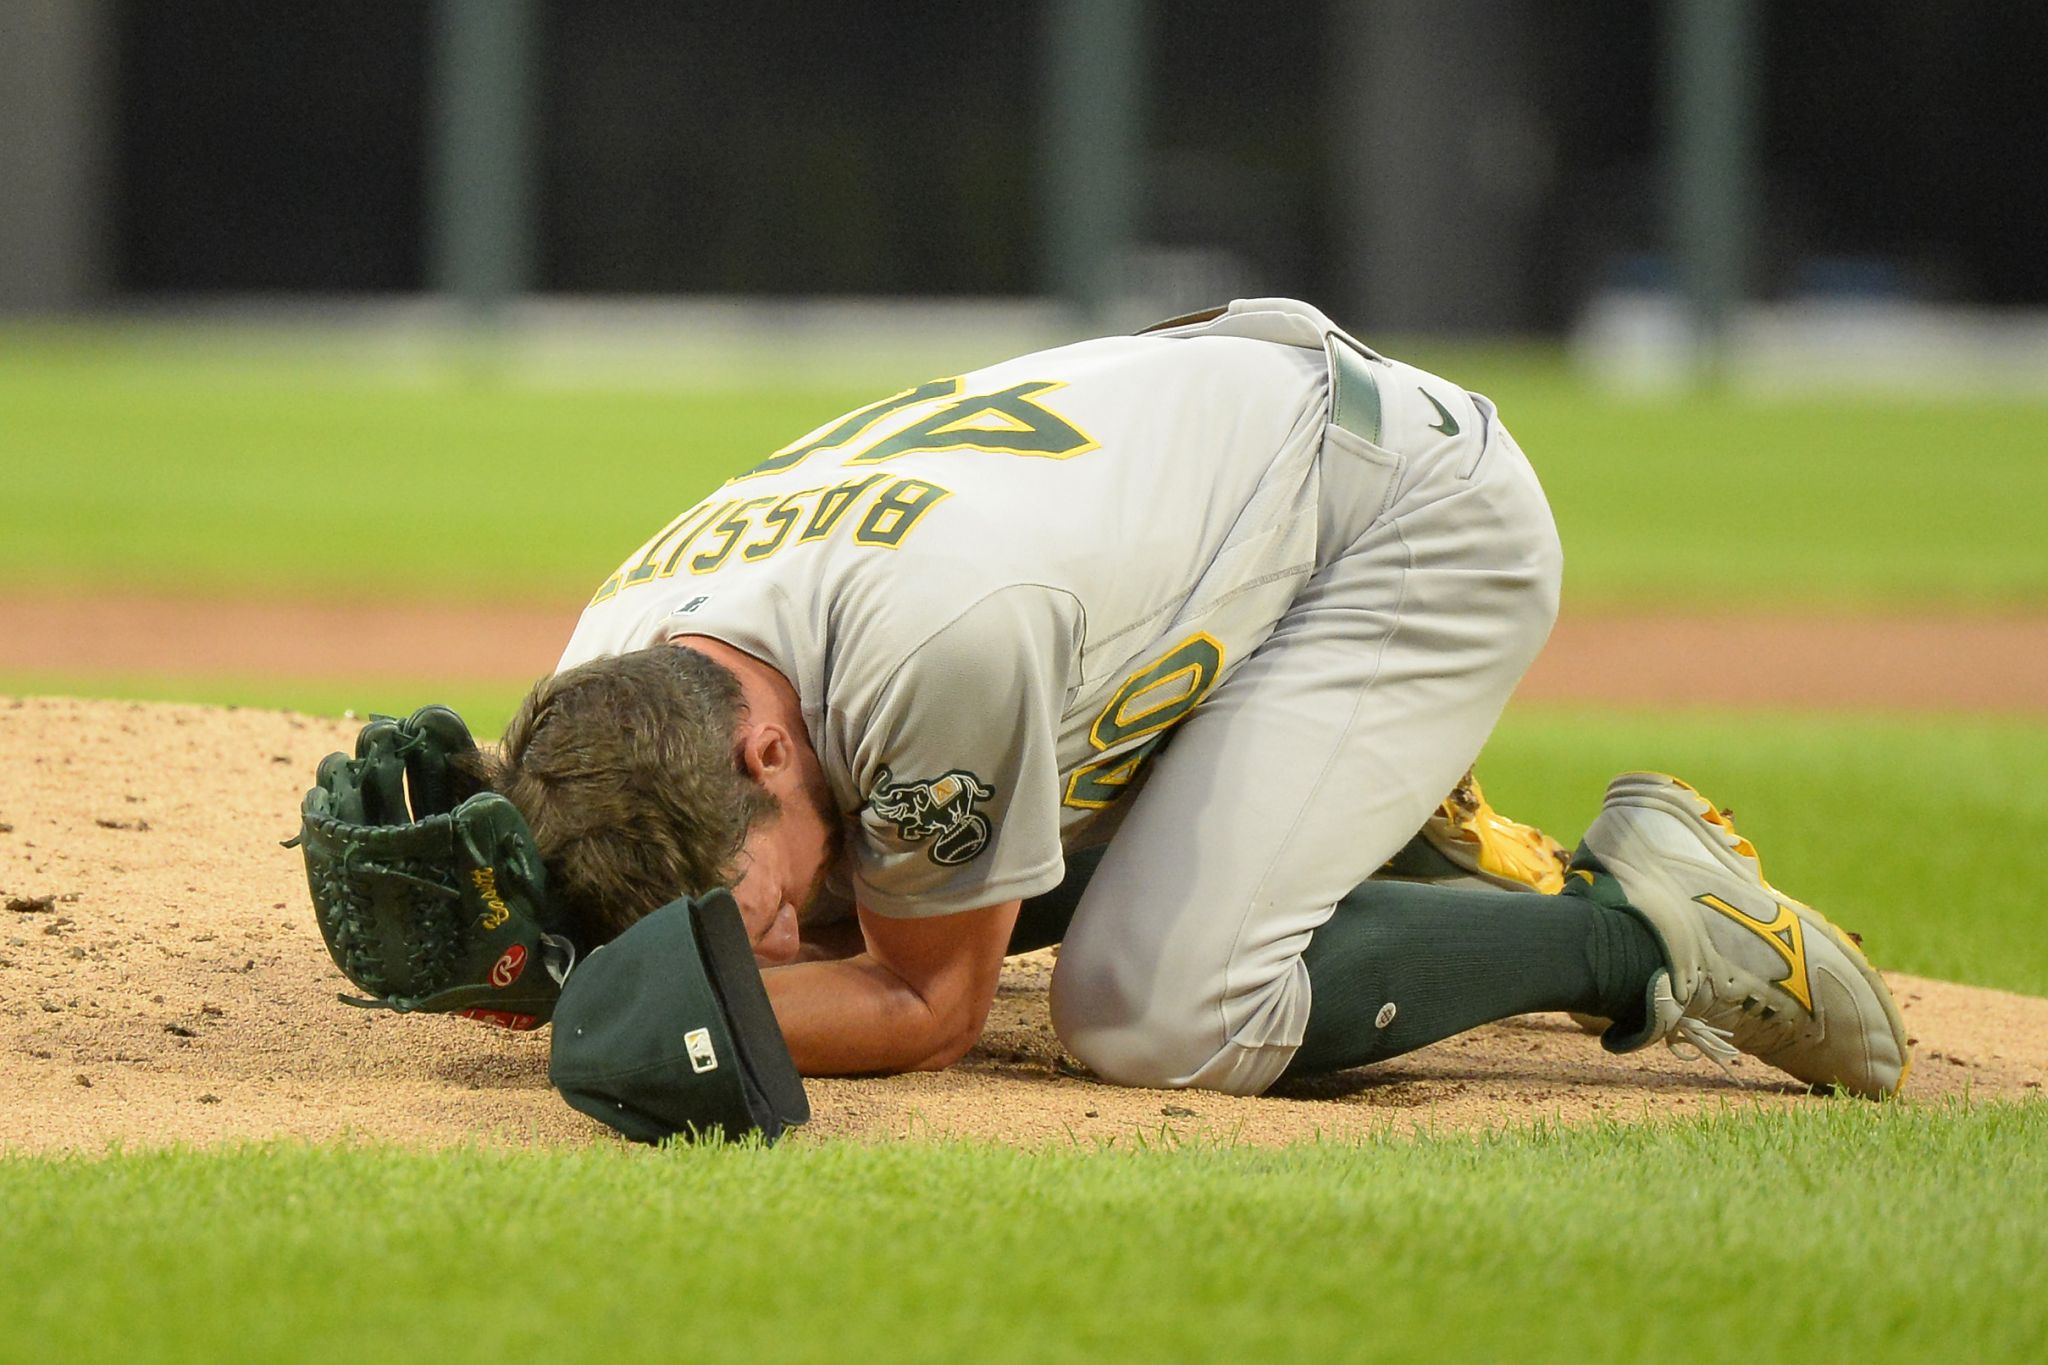 What's next for Oakland A's pitcher Chris Bassitt after scary face injury?  A UCSF doctor weighs in.